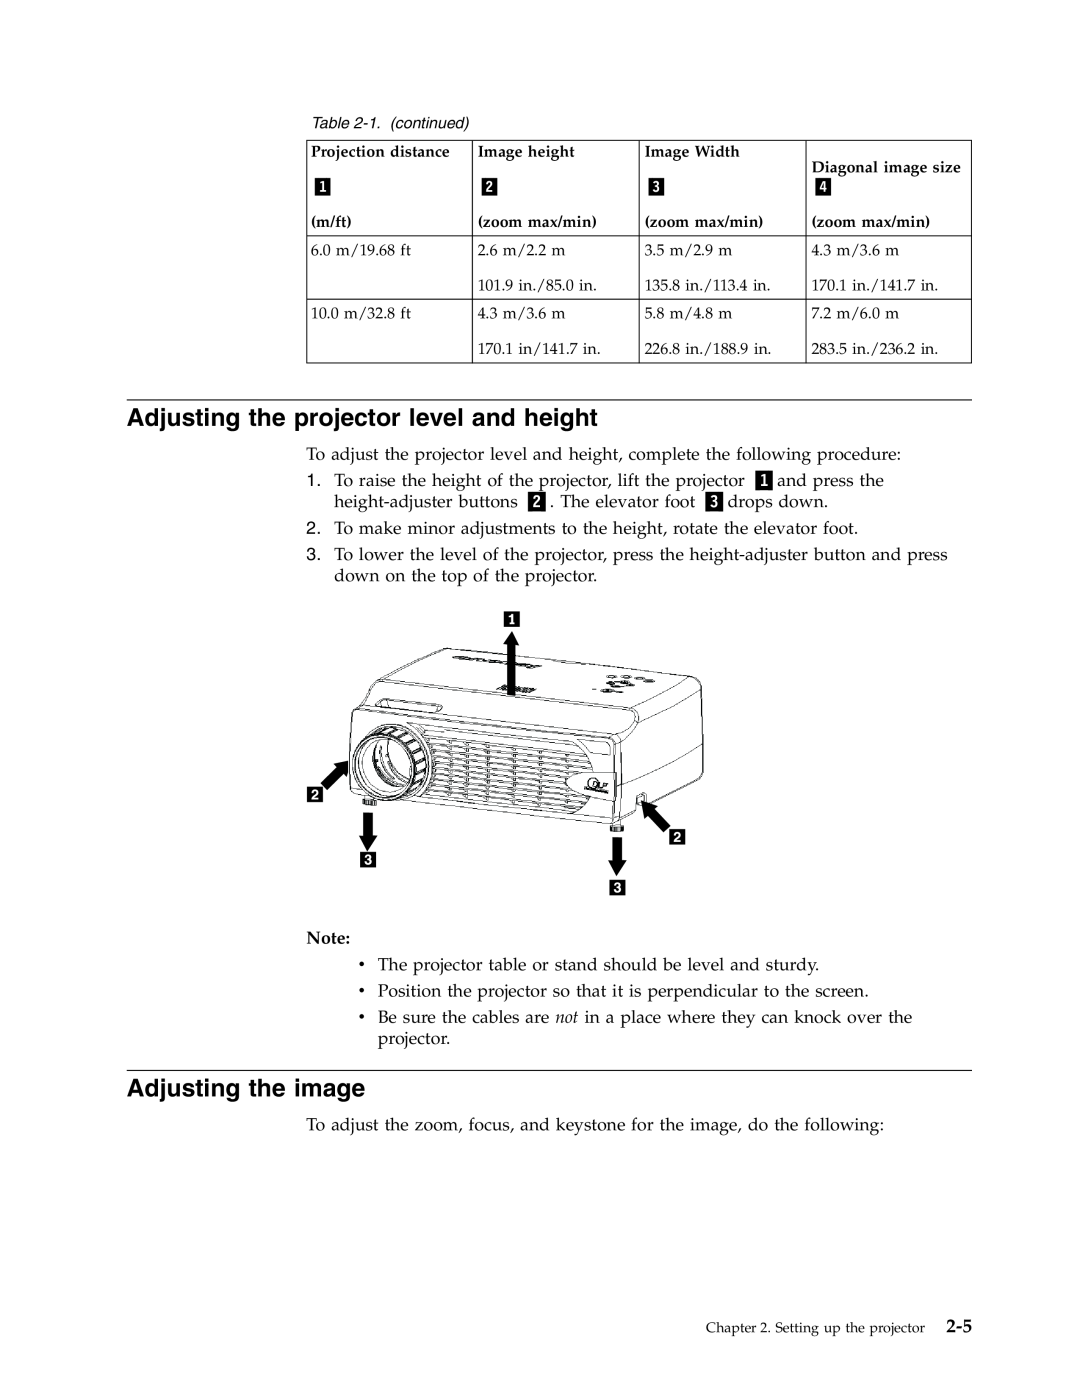 Lenovo C400 manual Adjusting the projector level and height, Adjusting the image 